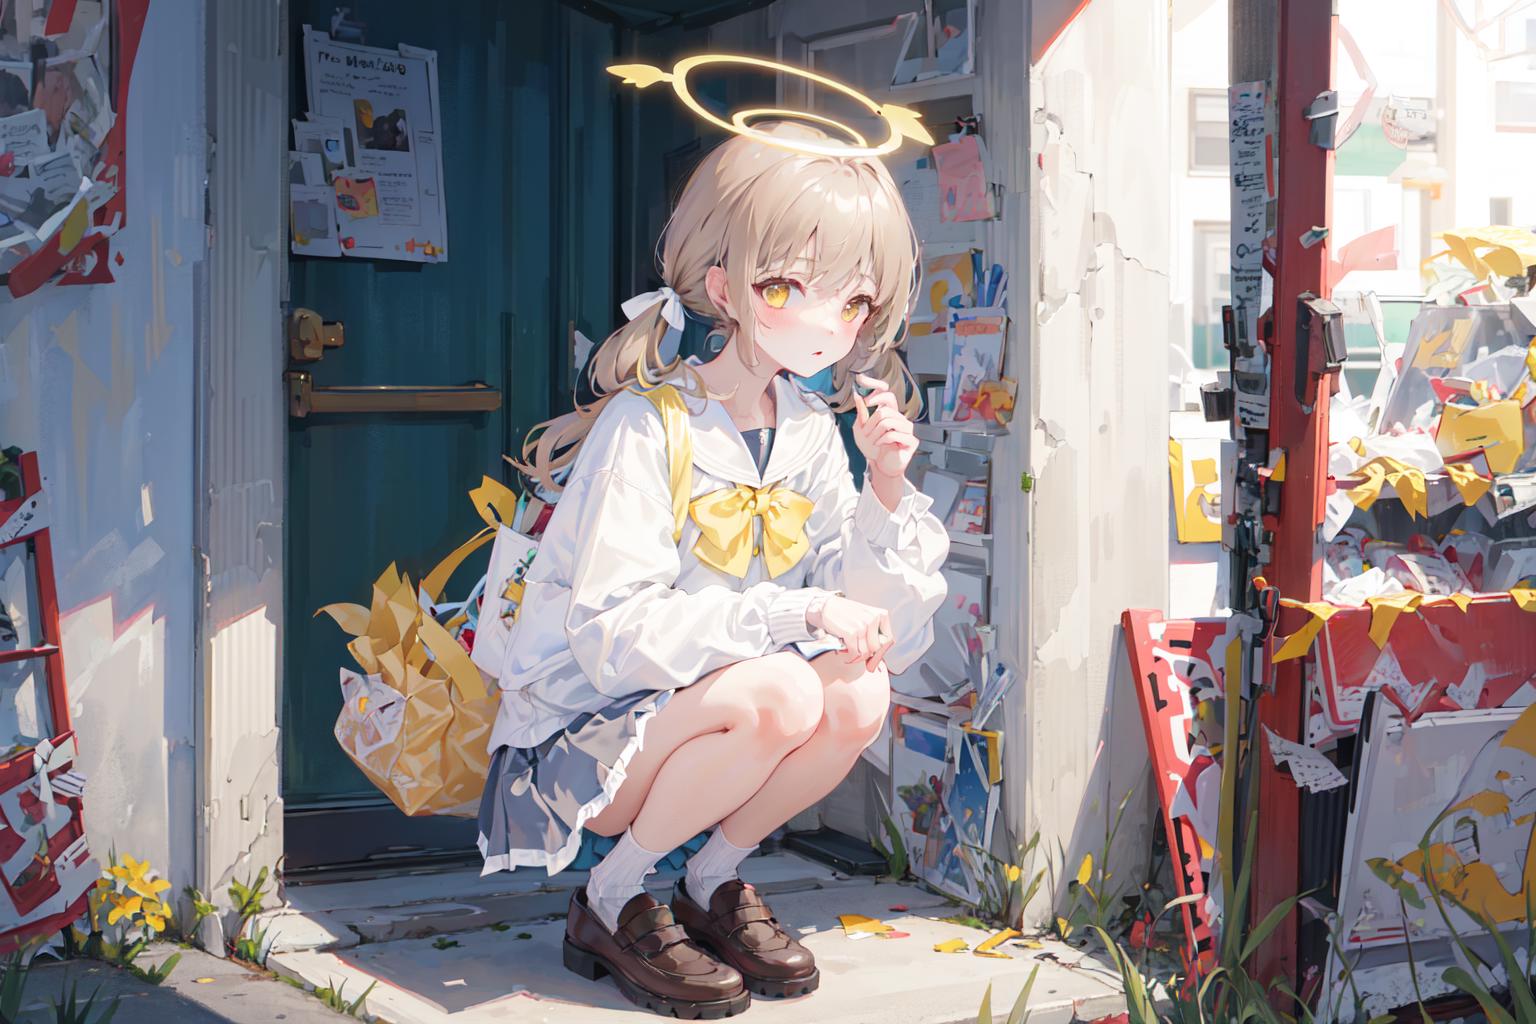 Anime girl with a halo, kneeling in front of a building.